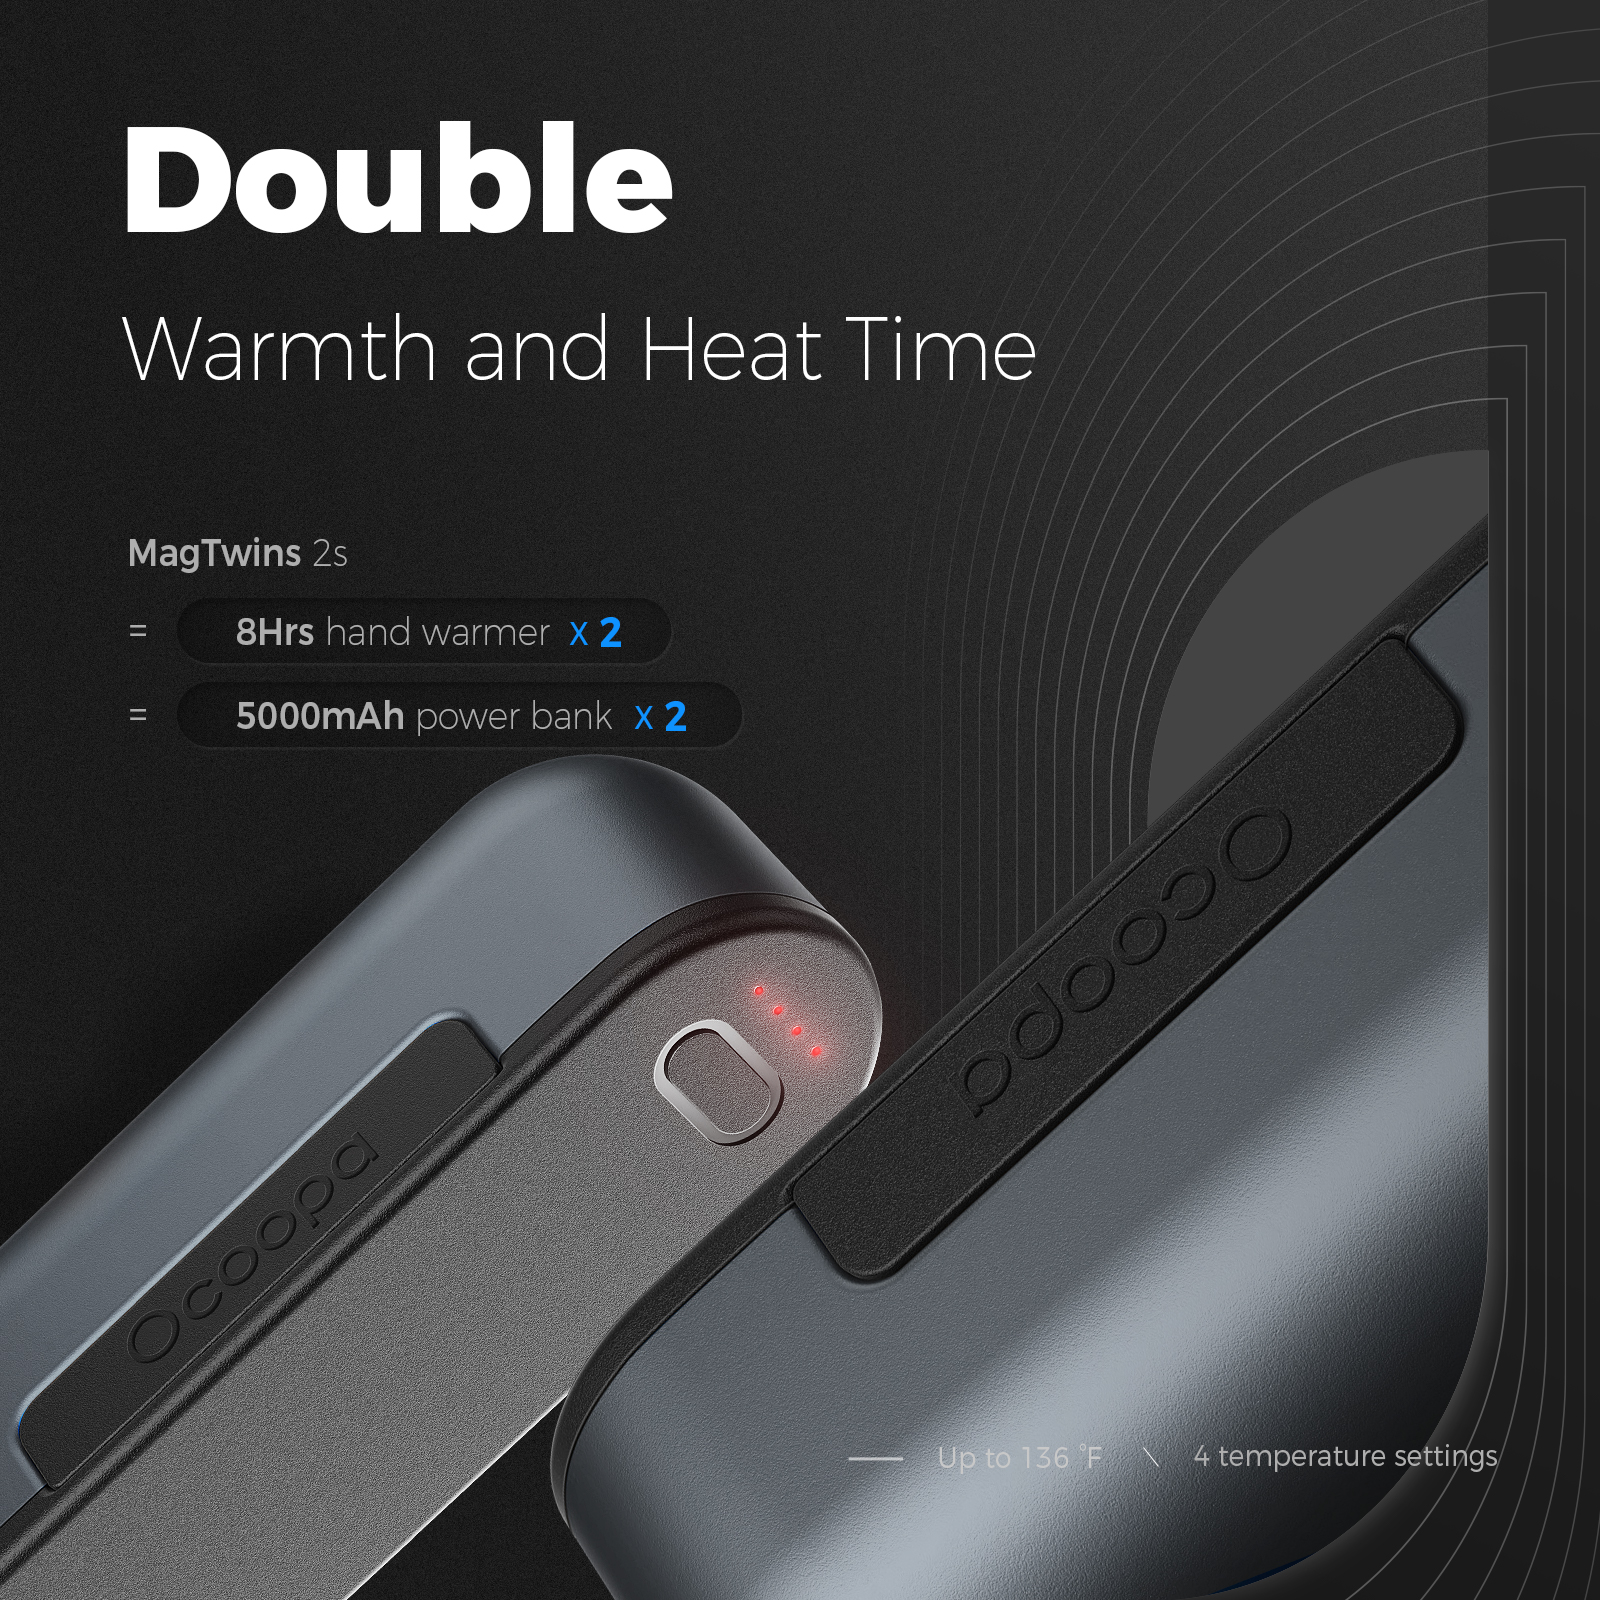 OCOOPA Hand Warmers Rechargeable 2 Pack, Magnetic Electric Hand Warmer, 16 Hrs Warmth 4 Levels Heat Up to 136℉, USB-C Portable Pocker Heater 10000mAh, Tech Gifts for Men Raynauds,Golf - image 5 of 9